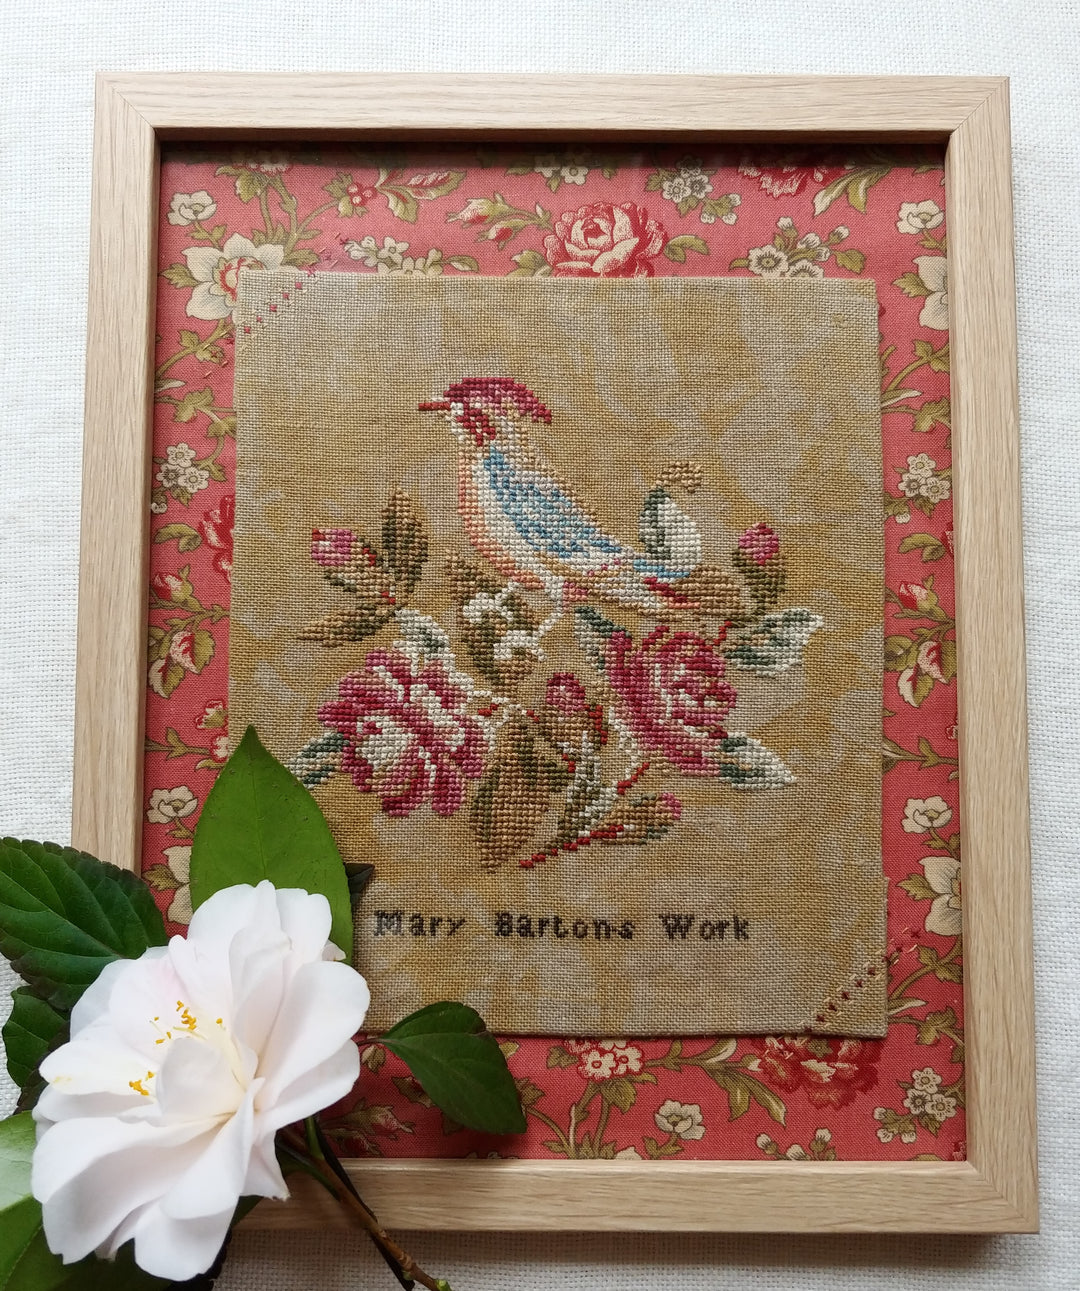 Mary Barton's Work: An antique reproduction | Mojo Stitches